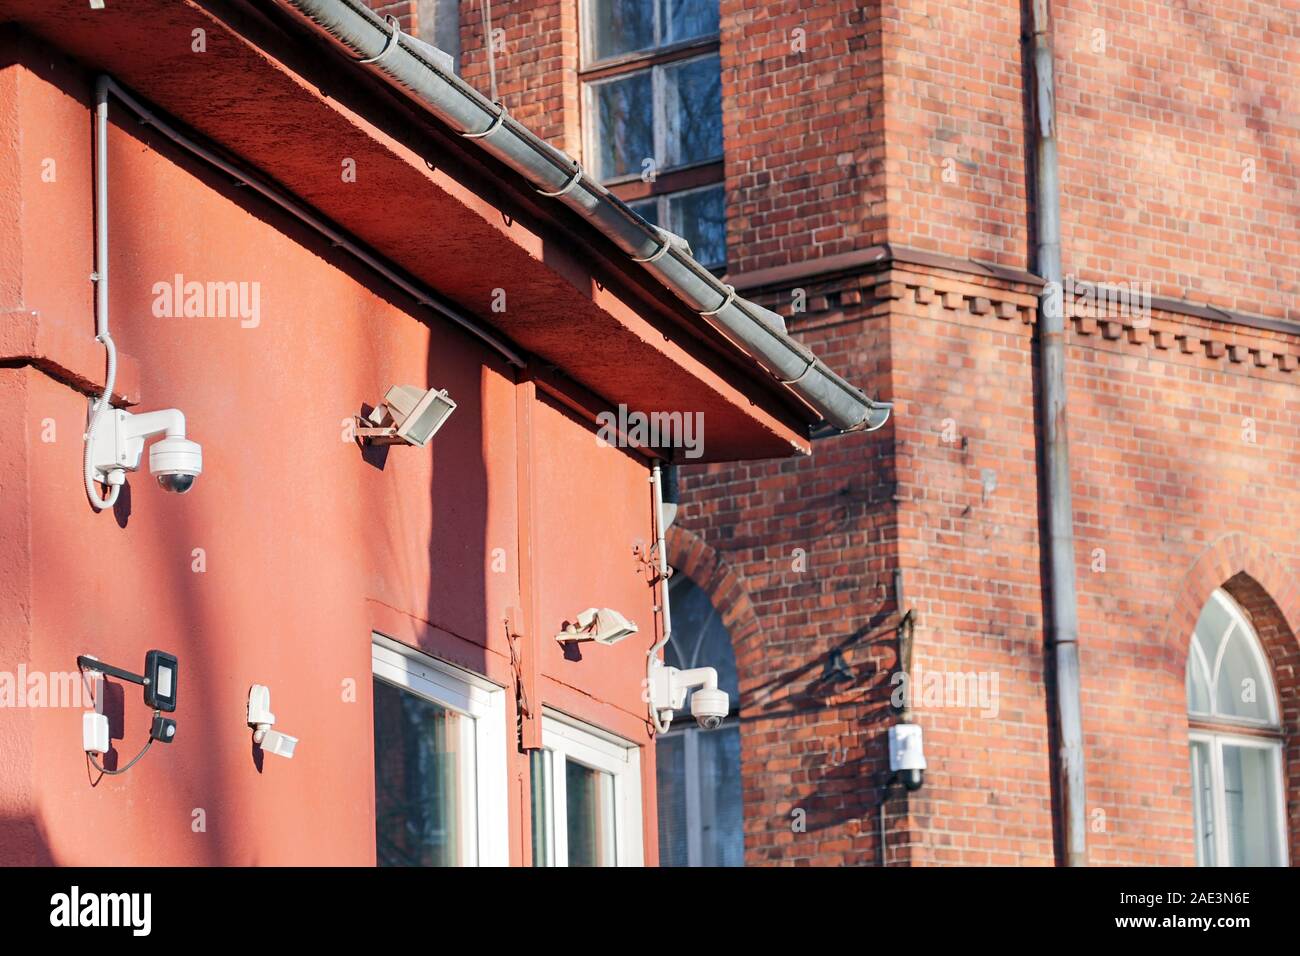 Surveillance cameras on the corner of building, Surveillance of the public  using CCTV is common in many areas around the world Stock Photo - Alamy